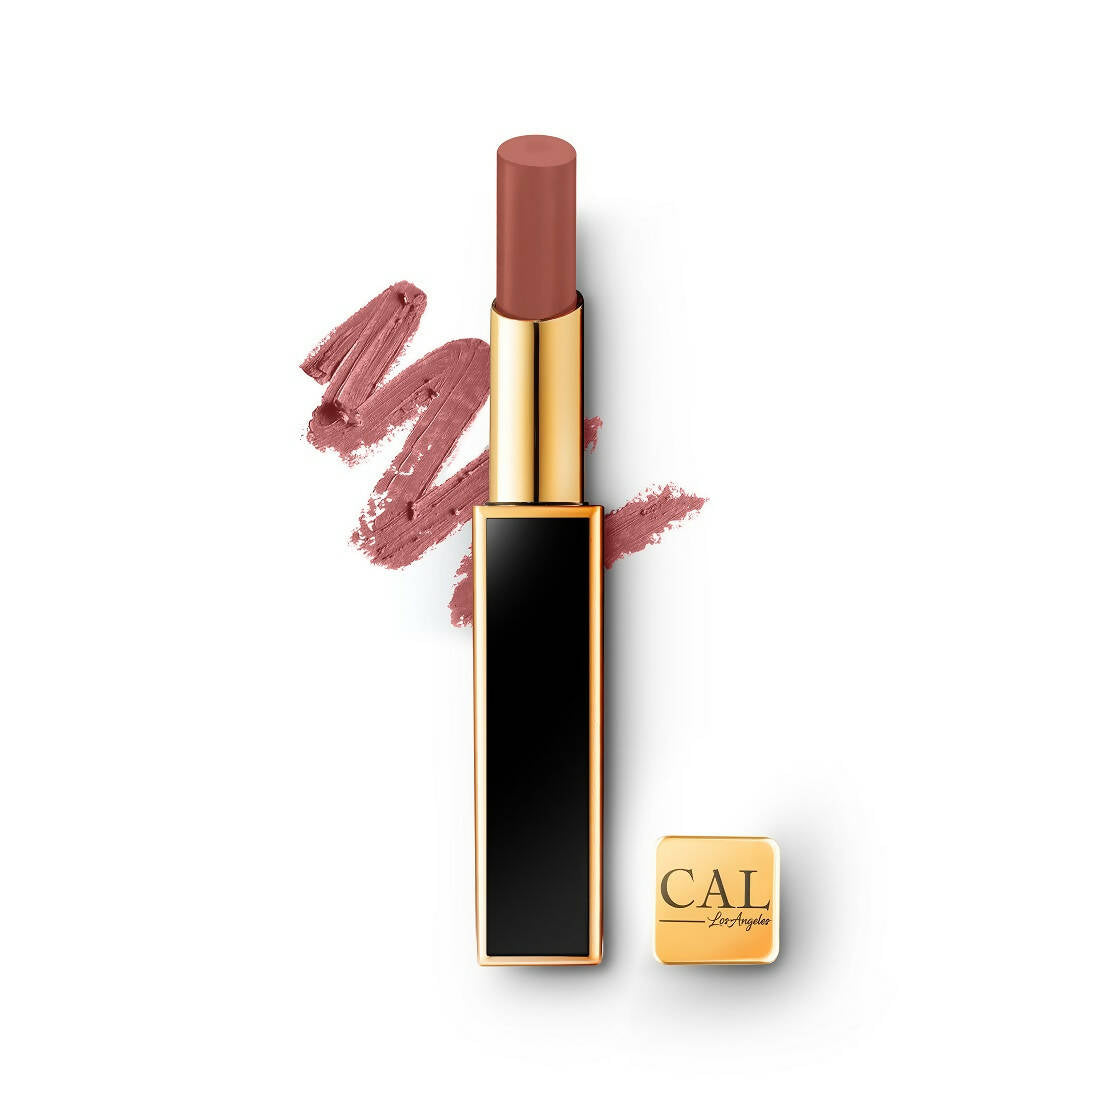 CAL Los Angeles Iconic Collection Lipstick - Brooklyn Beige Brown